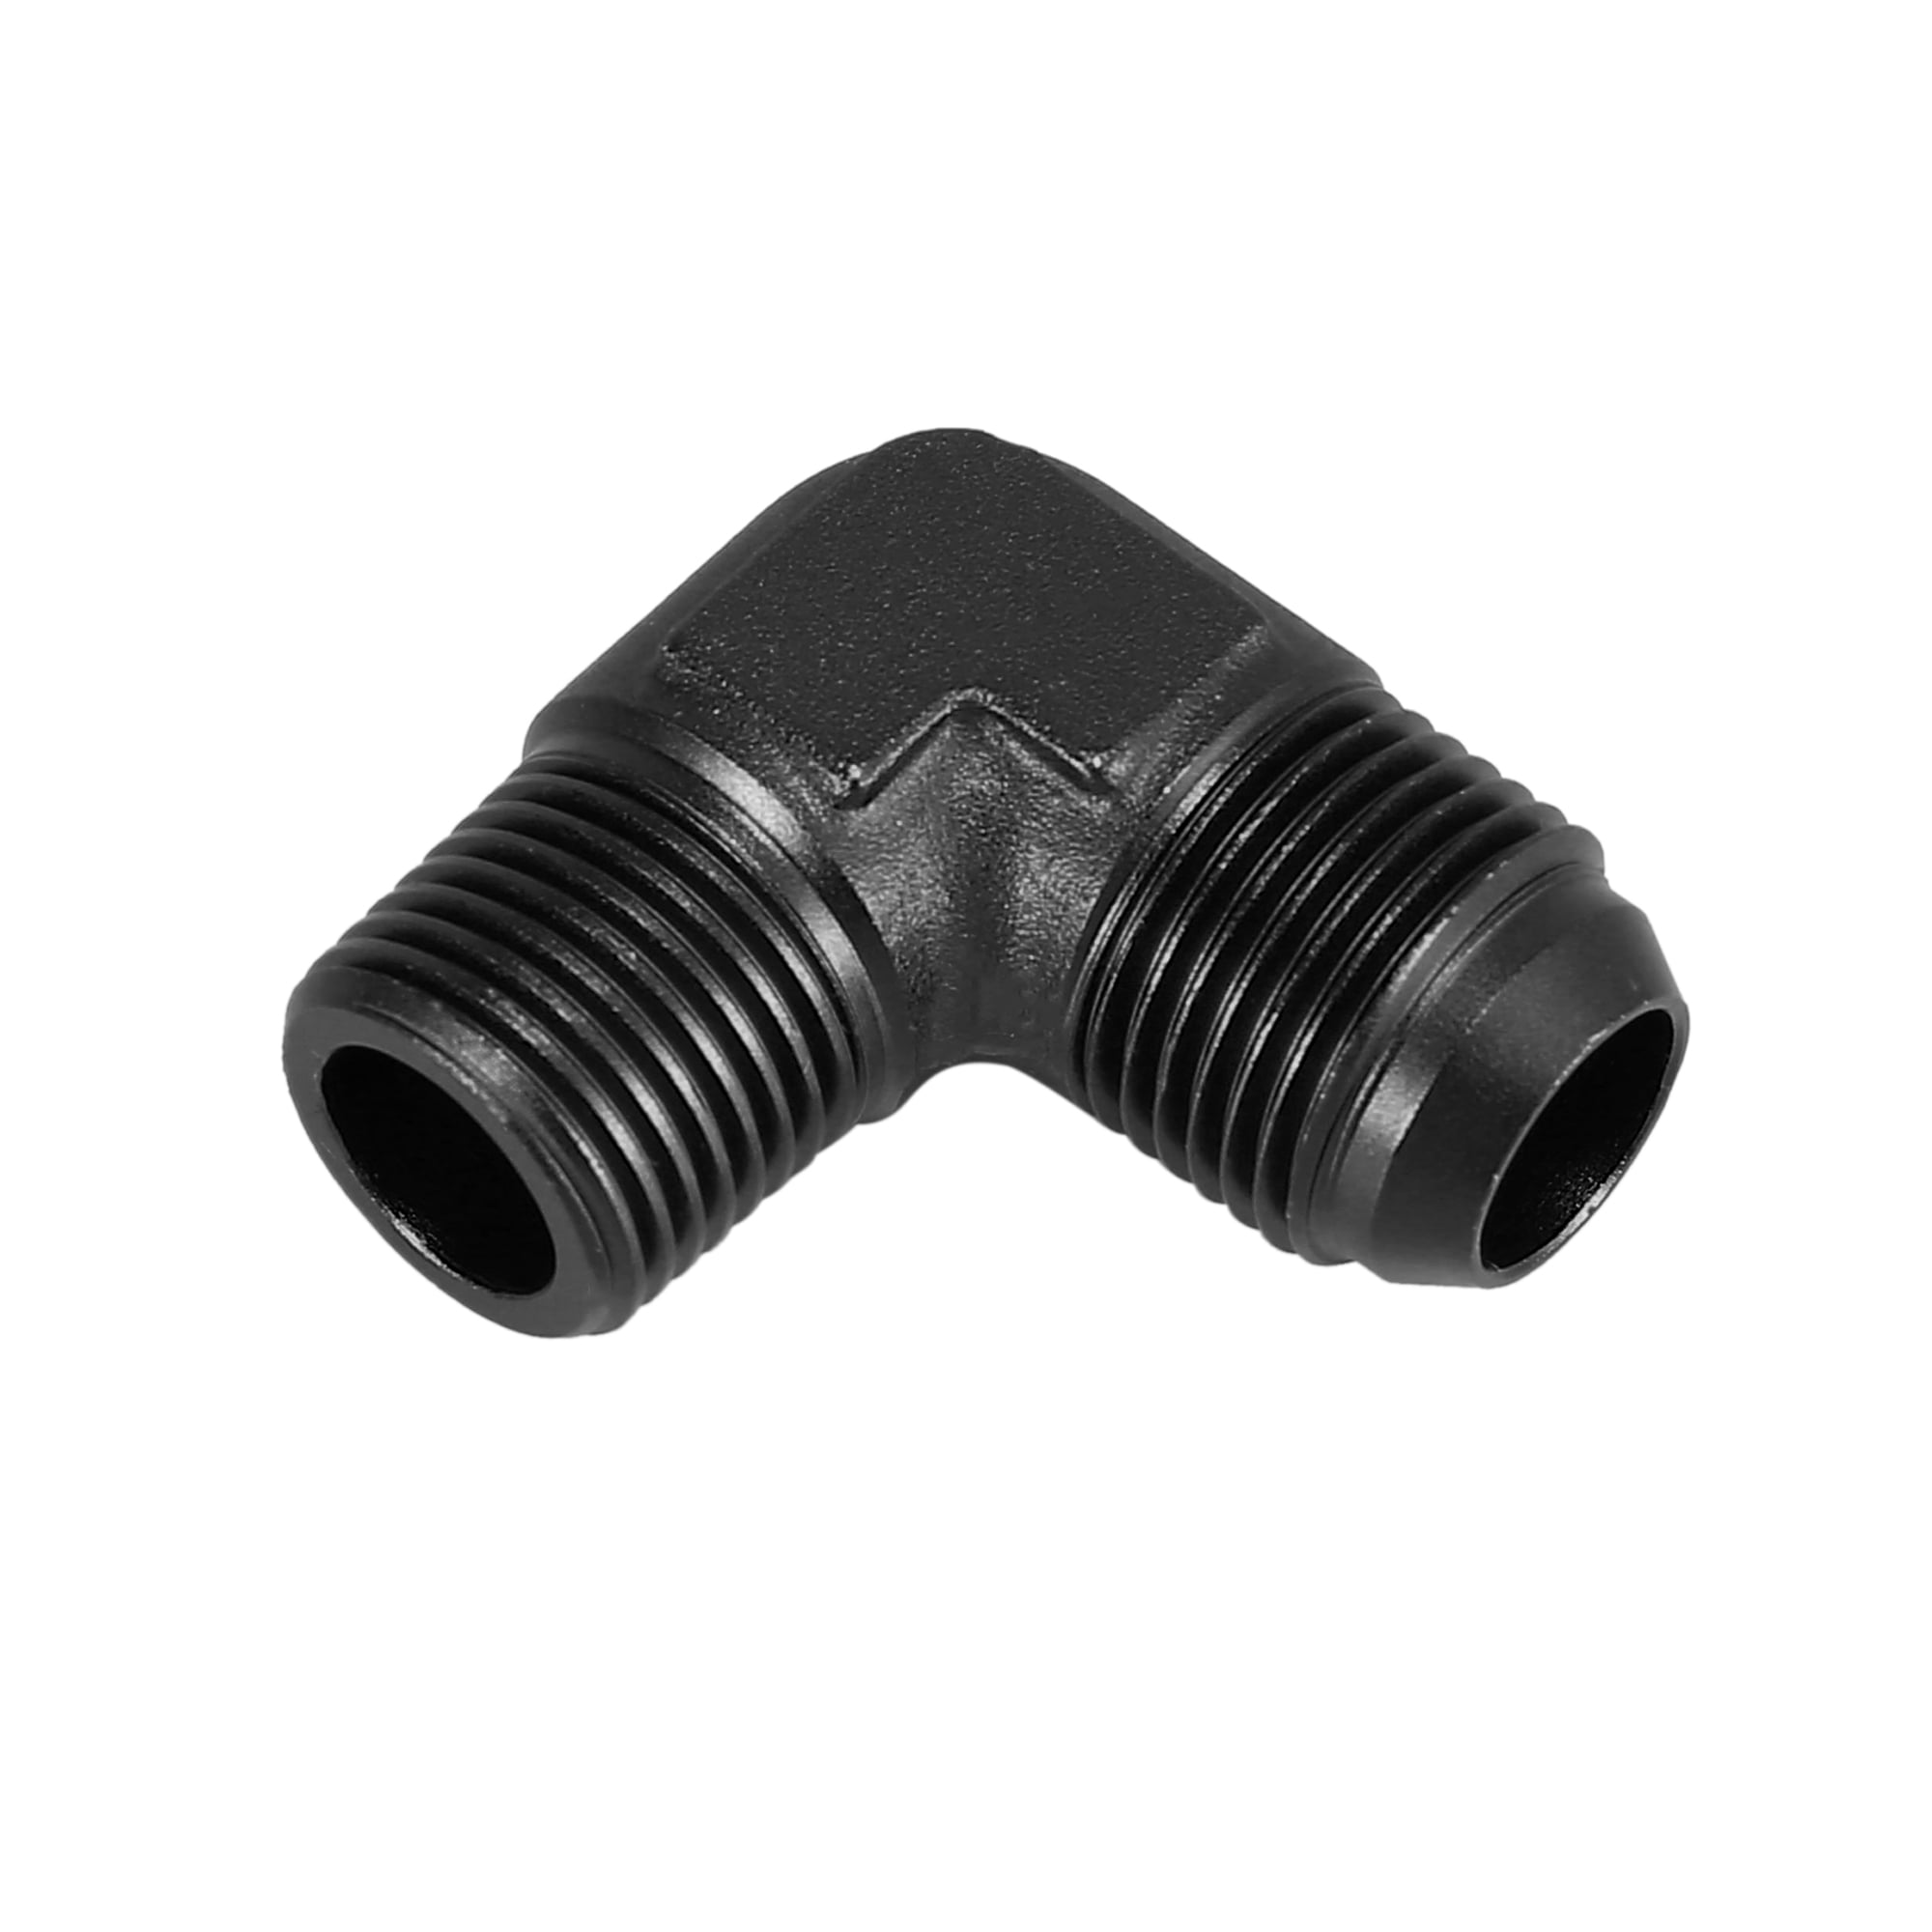 AN-10 BLACK Flare to 3/4 NPT FULL FLOW 90 DEGREE MALE ELBOW Hose Fitting Adapter 